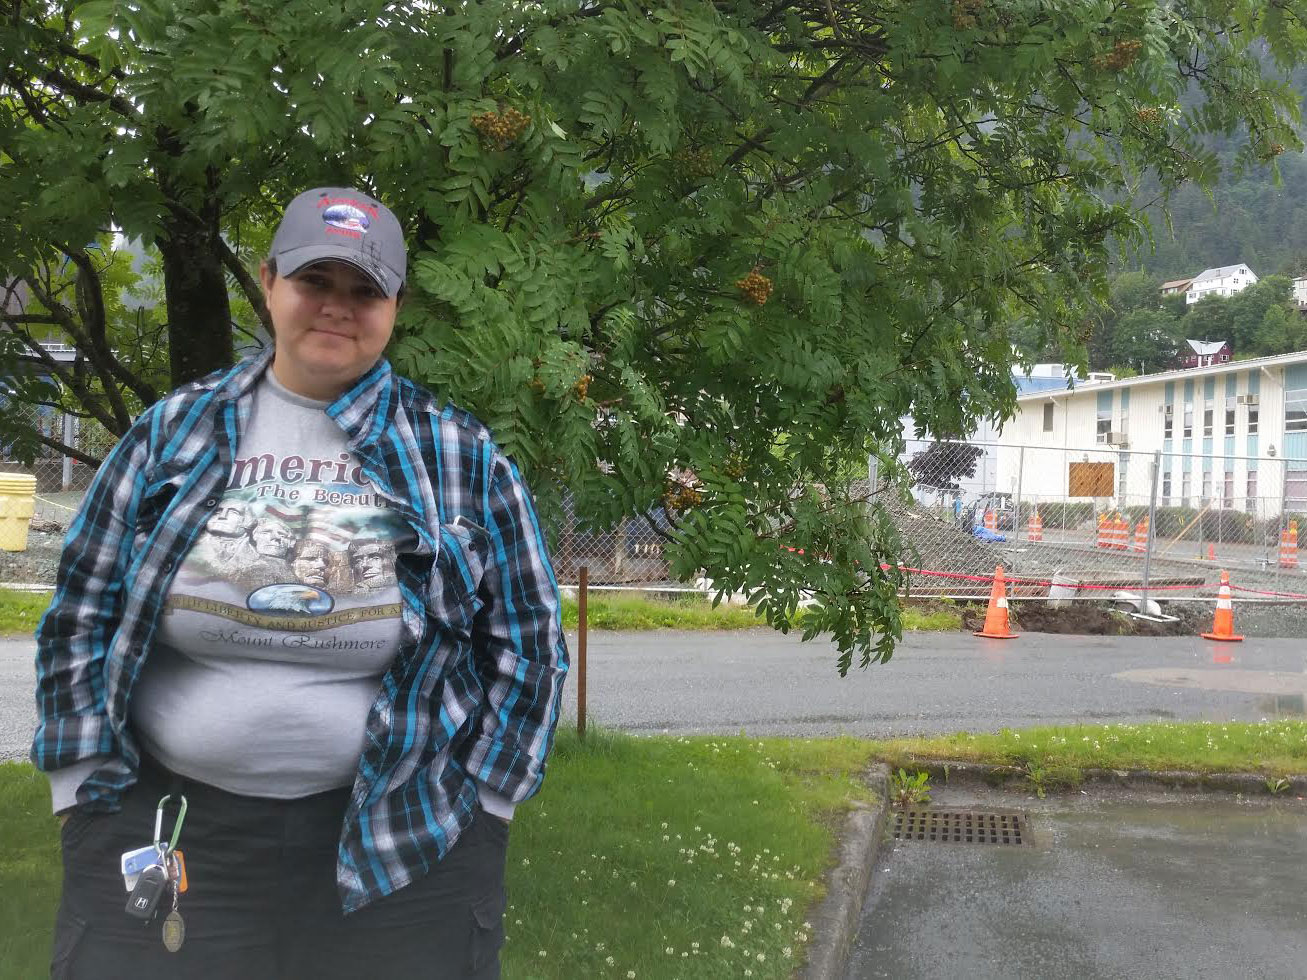 Rachel Pettijohn says she was discriminated against by two Juneau employers. The State of Alaska has no law protecting discrimination based on sexual identity or gender orientation. (Photo by Lakeidra Chavis/KTOO)